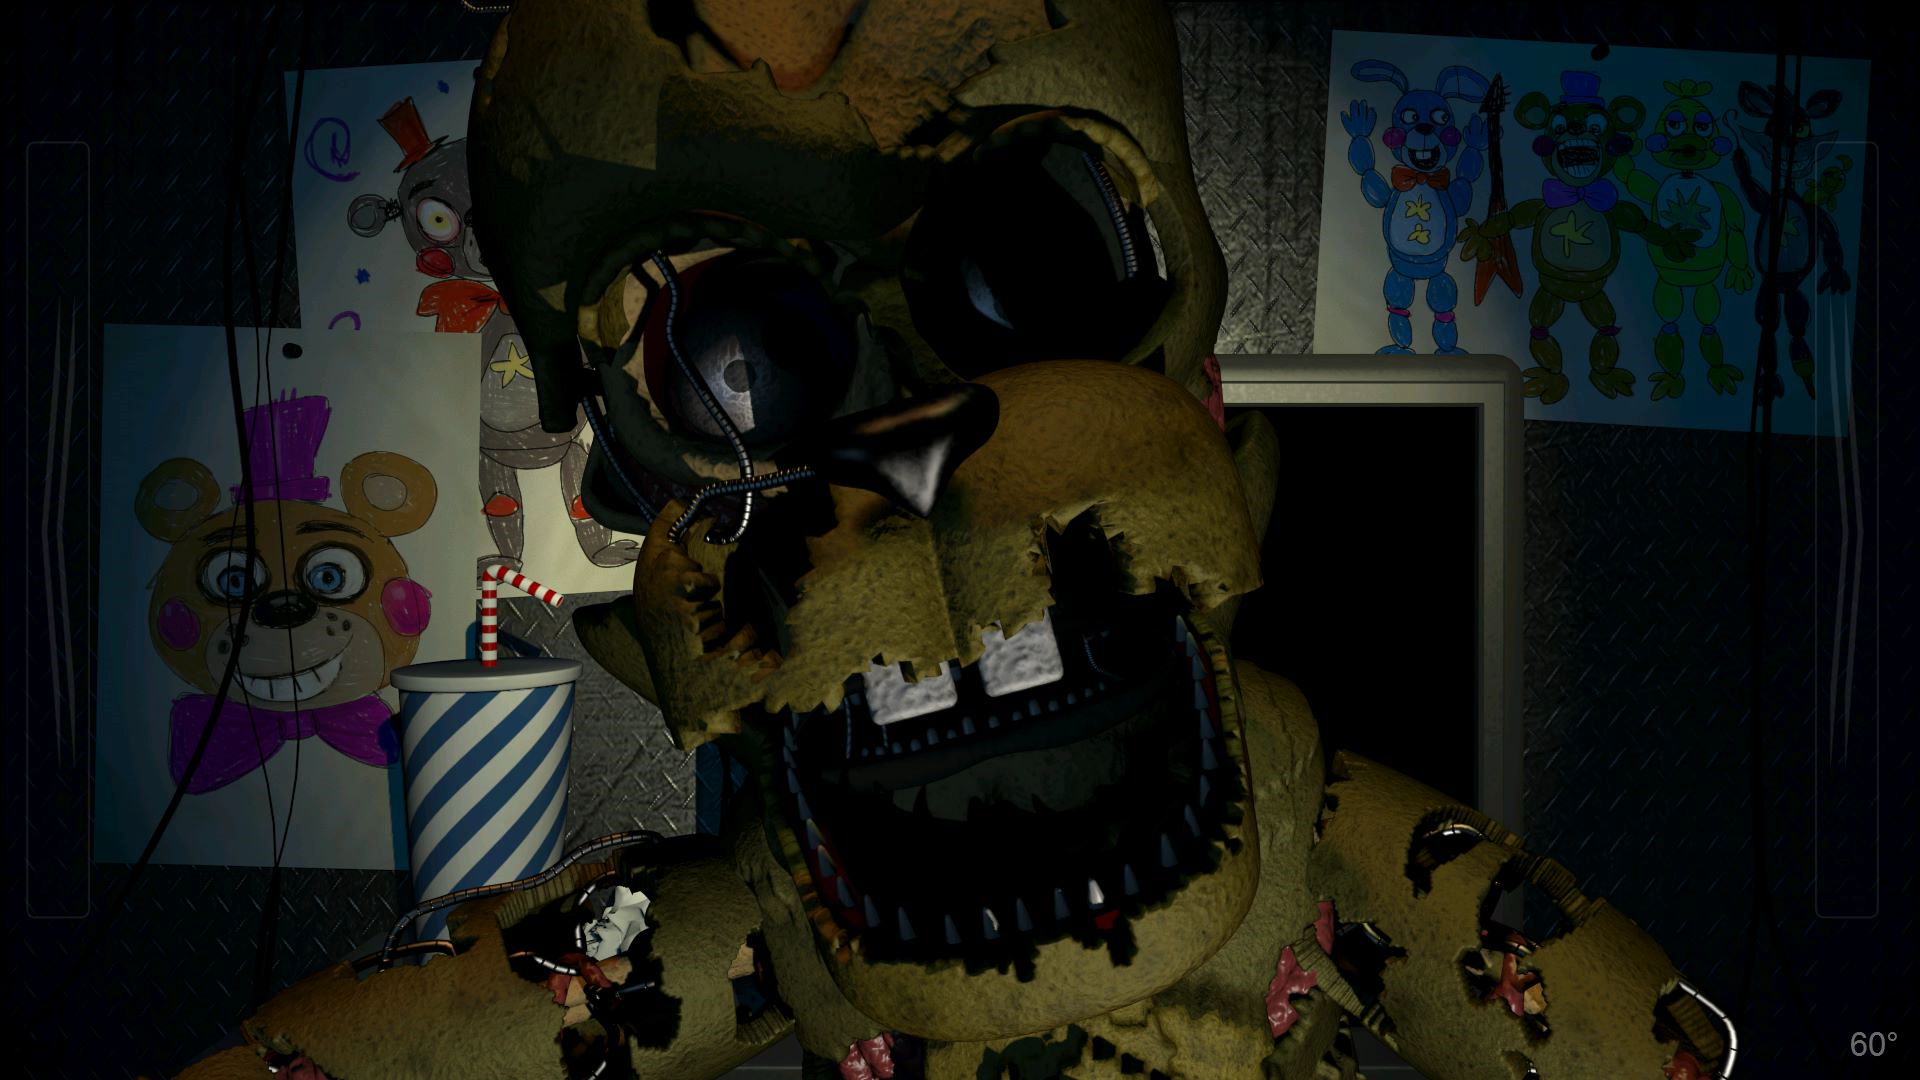 Five Nights at Freddy's pizzeria simulator opens its doors